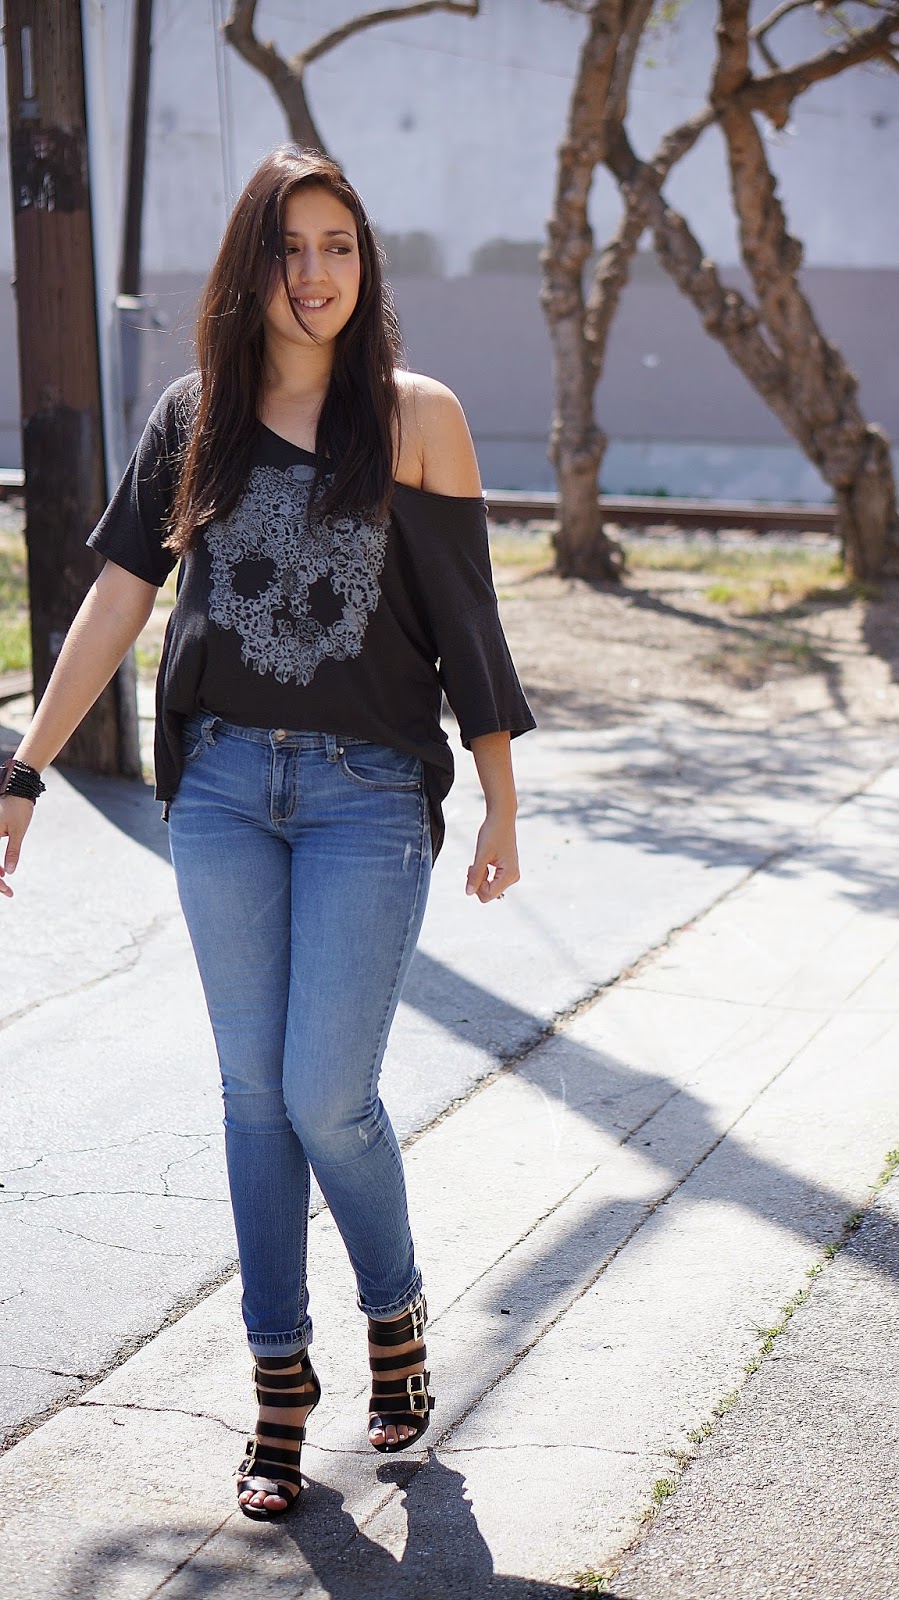 Fashion blogger, Latina Fashion blogger, casual outfit, Mossimo Saphire Strappy heels, Target heels, Off the shoulder top, skull shirt, free spirit, railroad tracks 